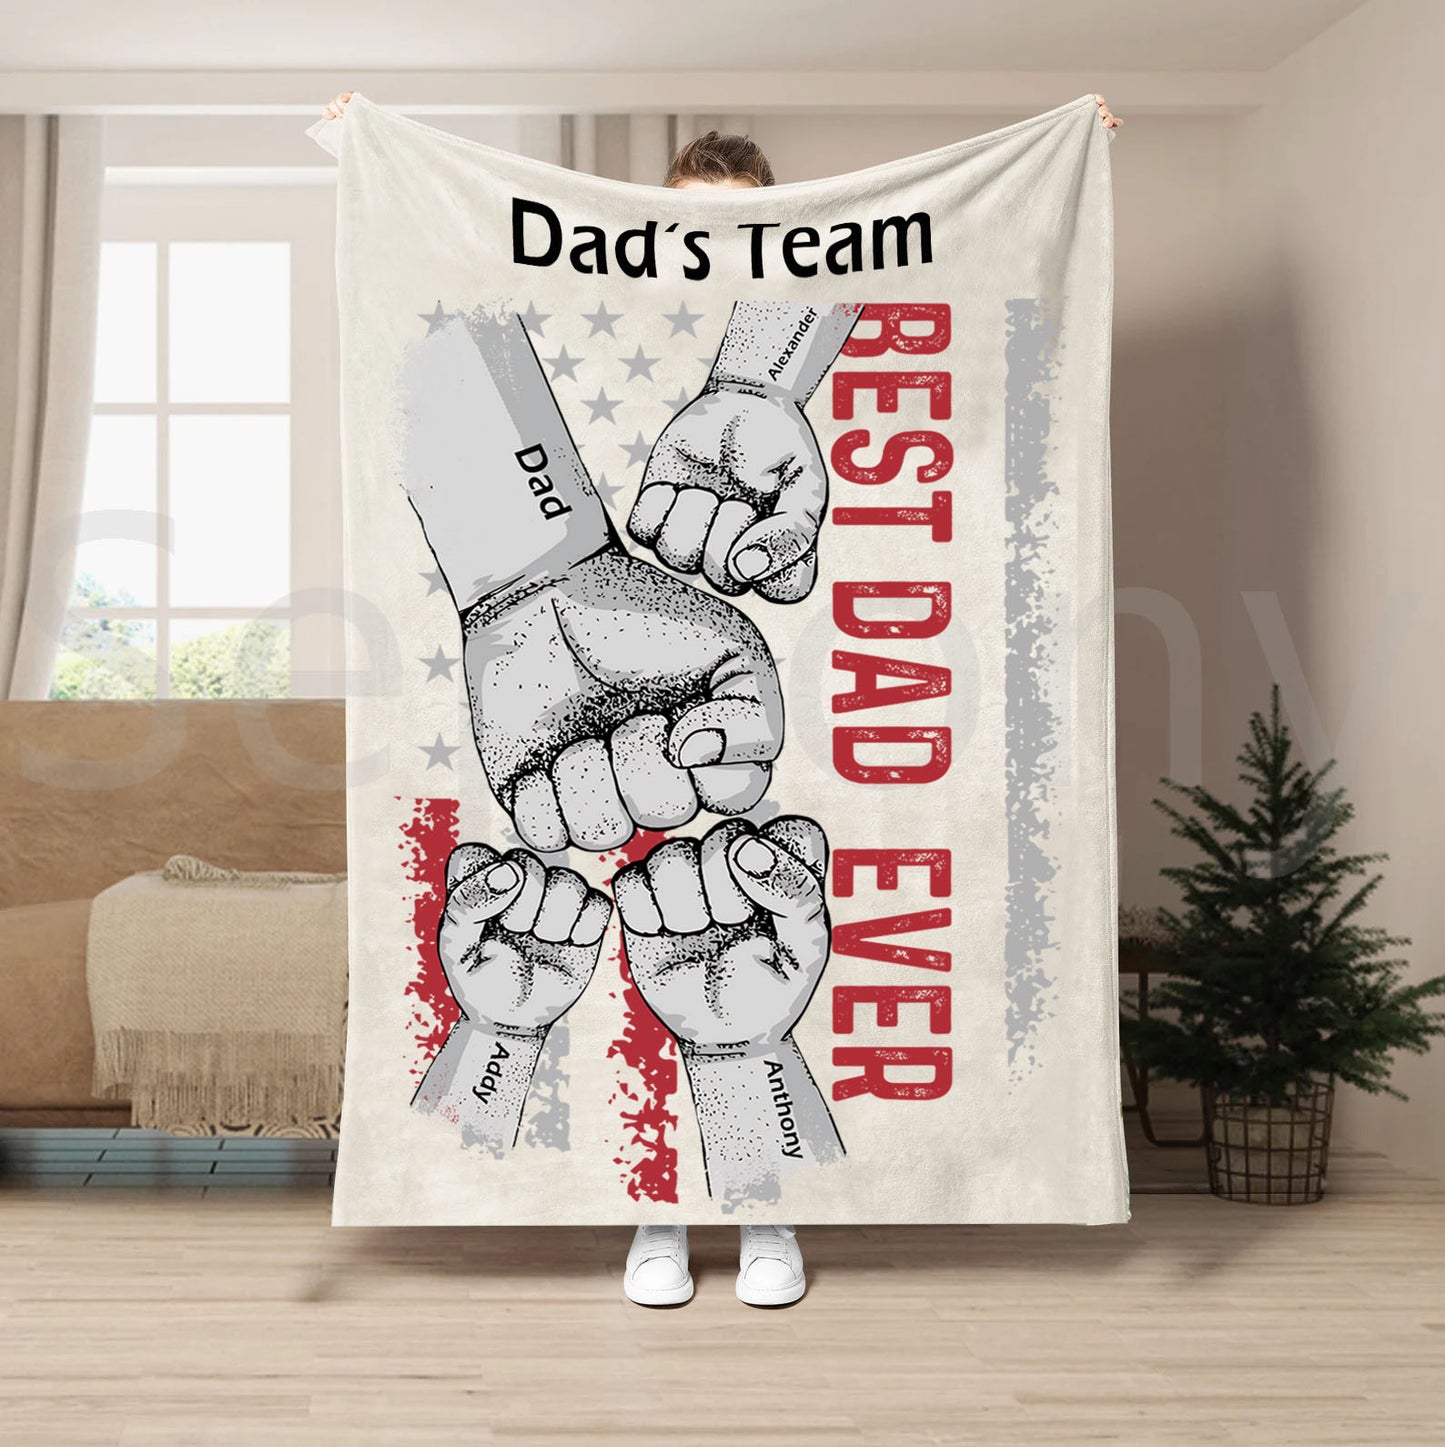 Best Dad Ever - Personalized Blankets